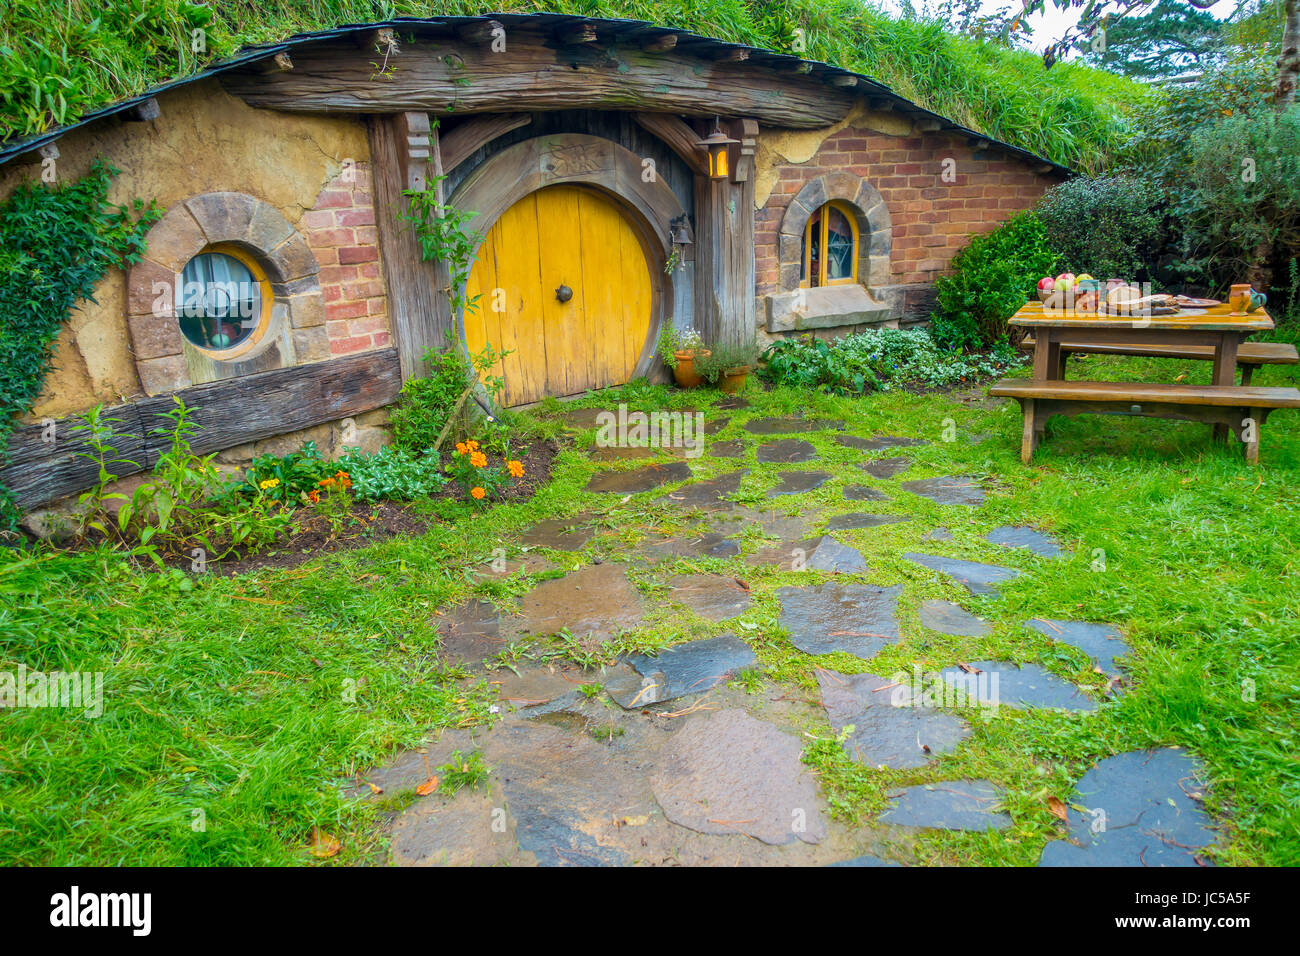 NORTH ISLAND, NEW ZEALAND- MAY 16, 2017: Hobbit house with yellow door, hobbiton movie set, site made for movies: Hobbit and Lord of the ring in Matam Stock Photo